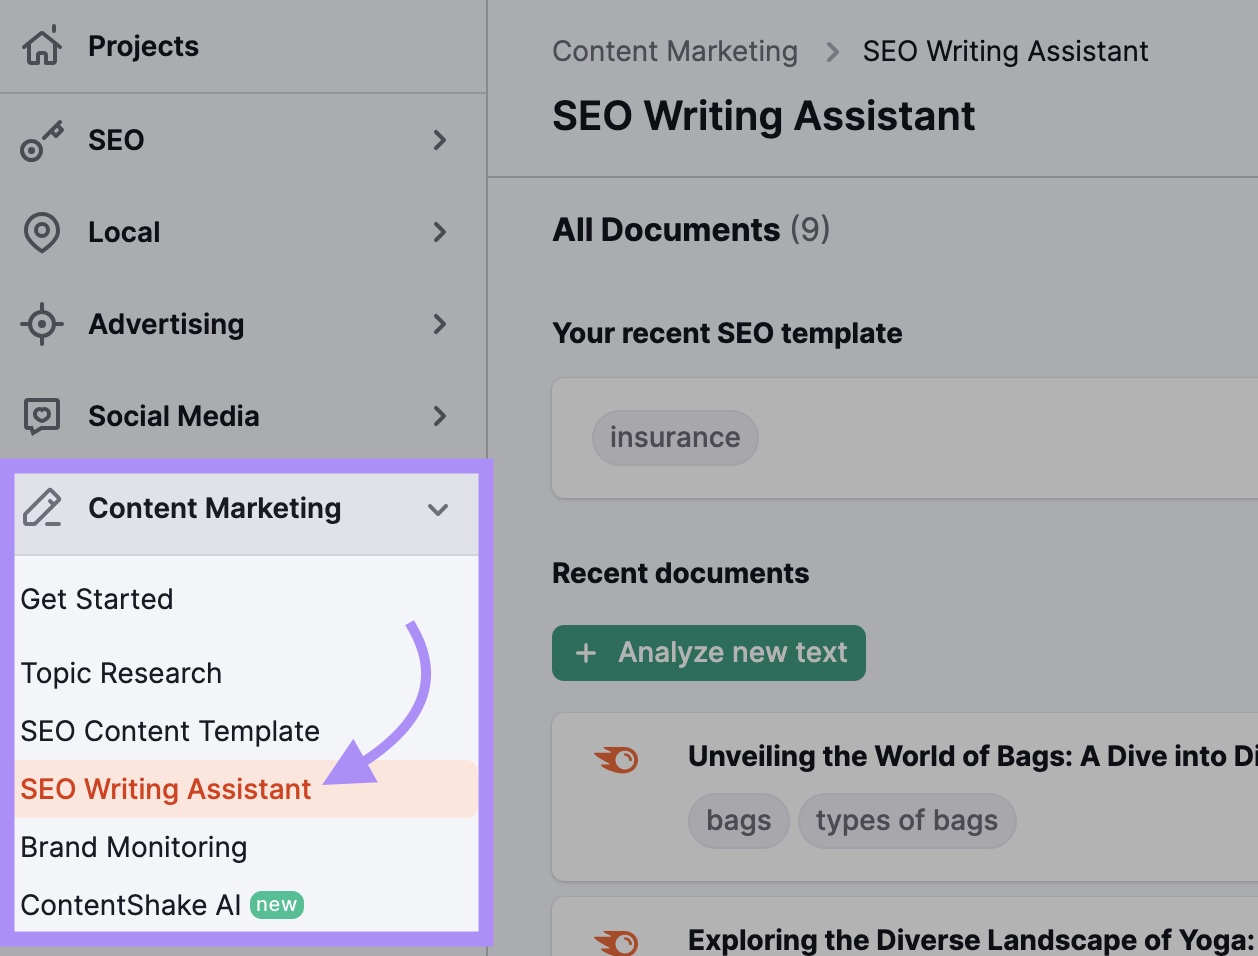 Navigating to SEO Writing Assistant in Semrush dashboard